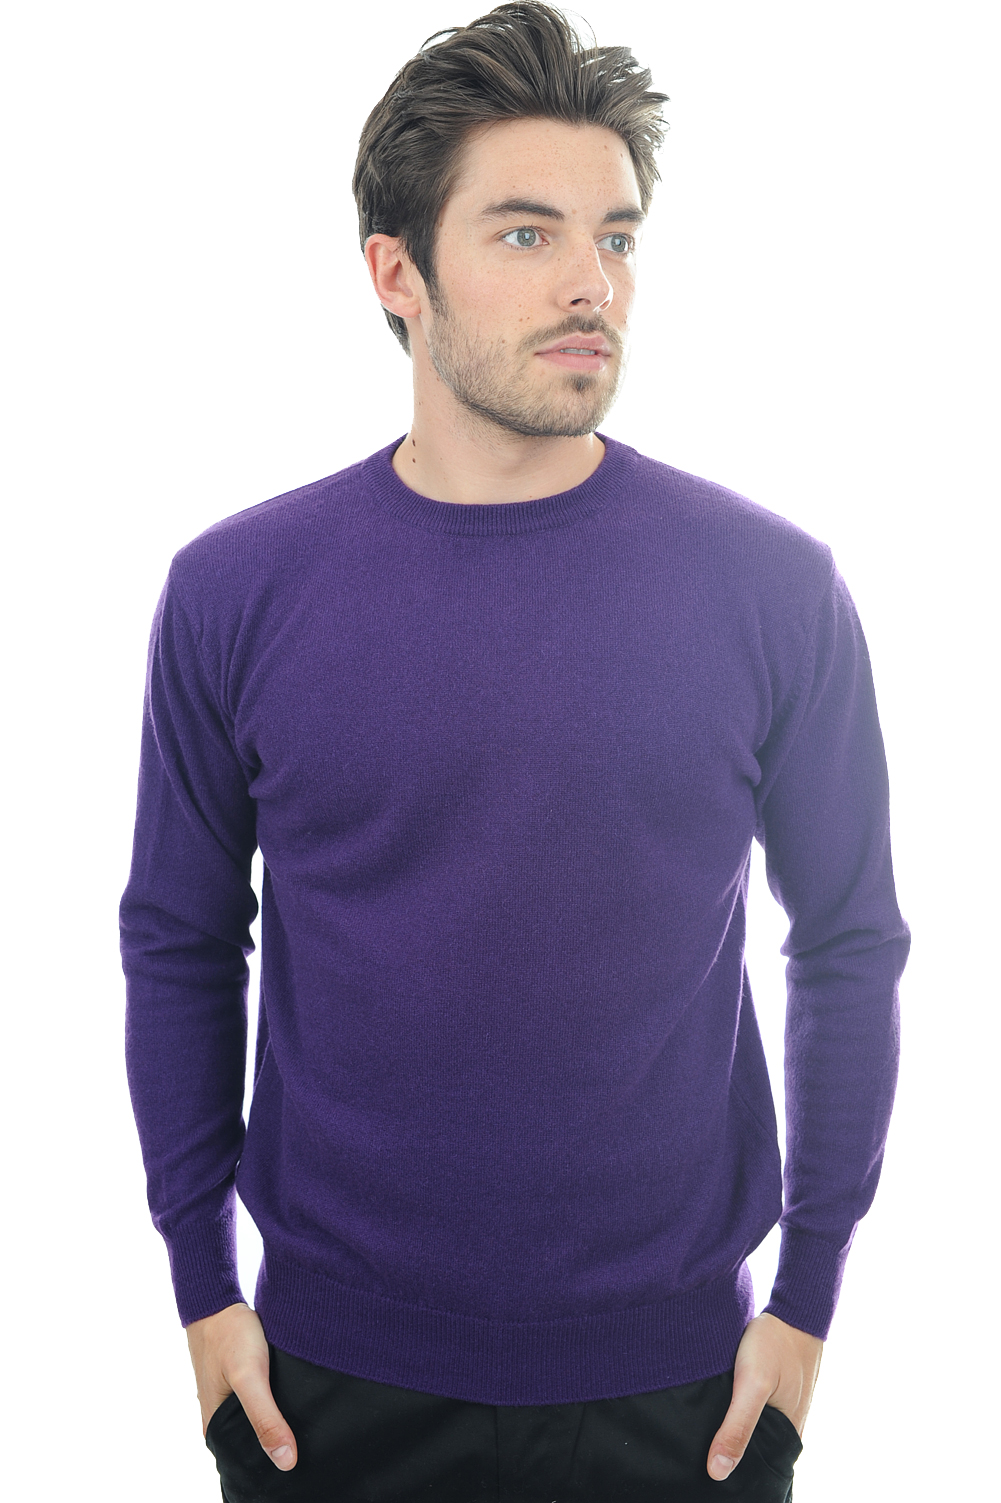 Cachemire pull homme col rond nestor violet tres vif 2xl